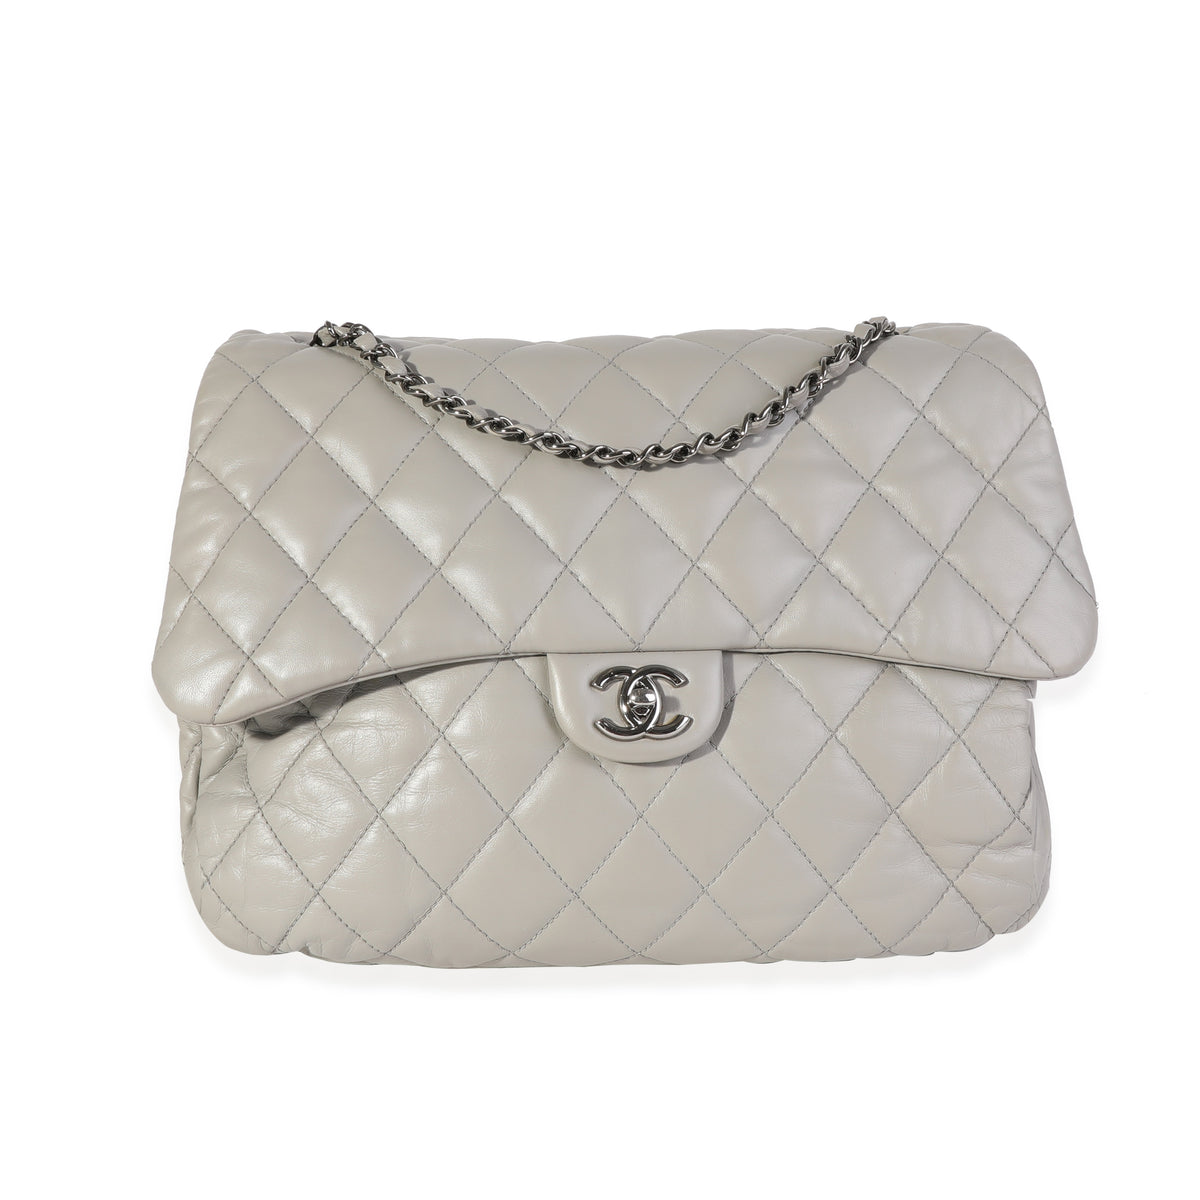 Chanel Tan Quilted Patent Leather Maxi Double Flap, myGemma, DE